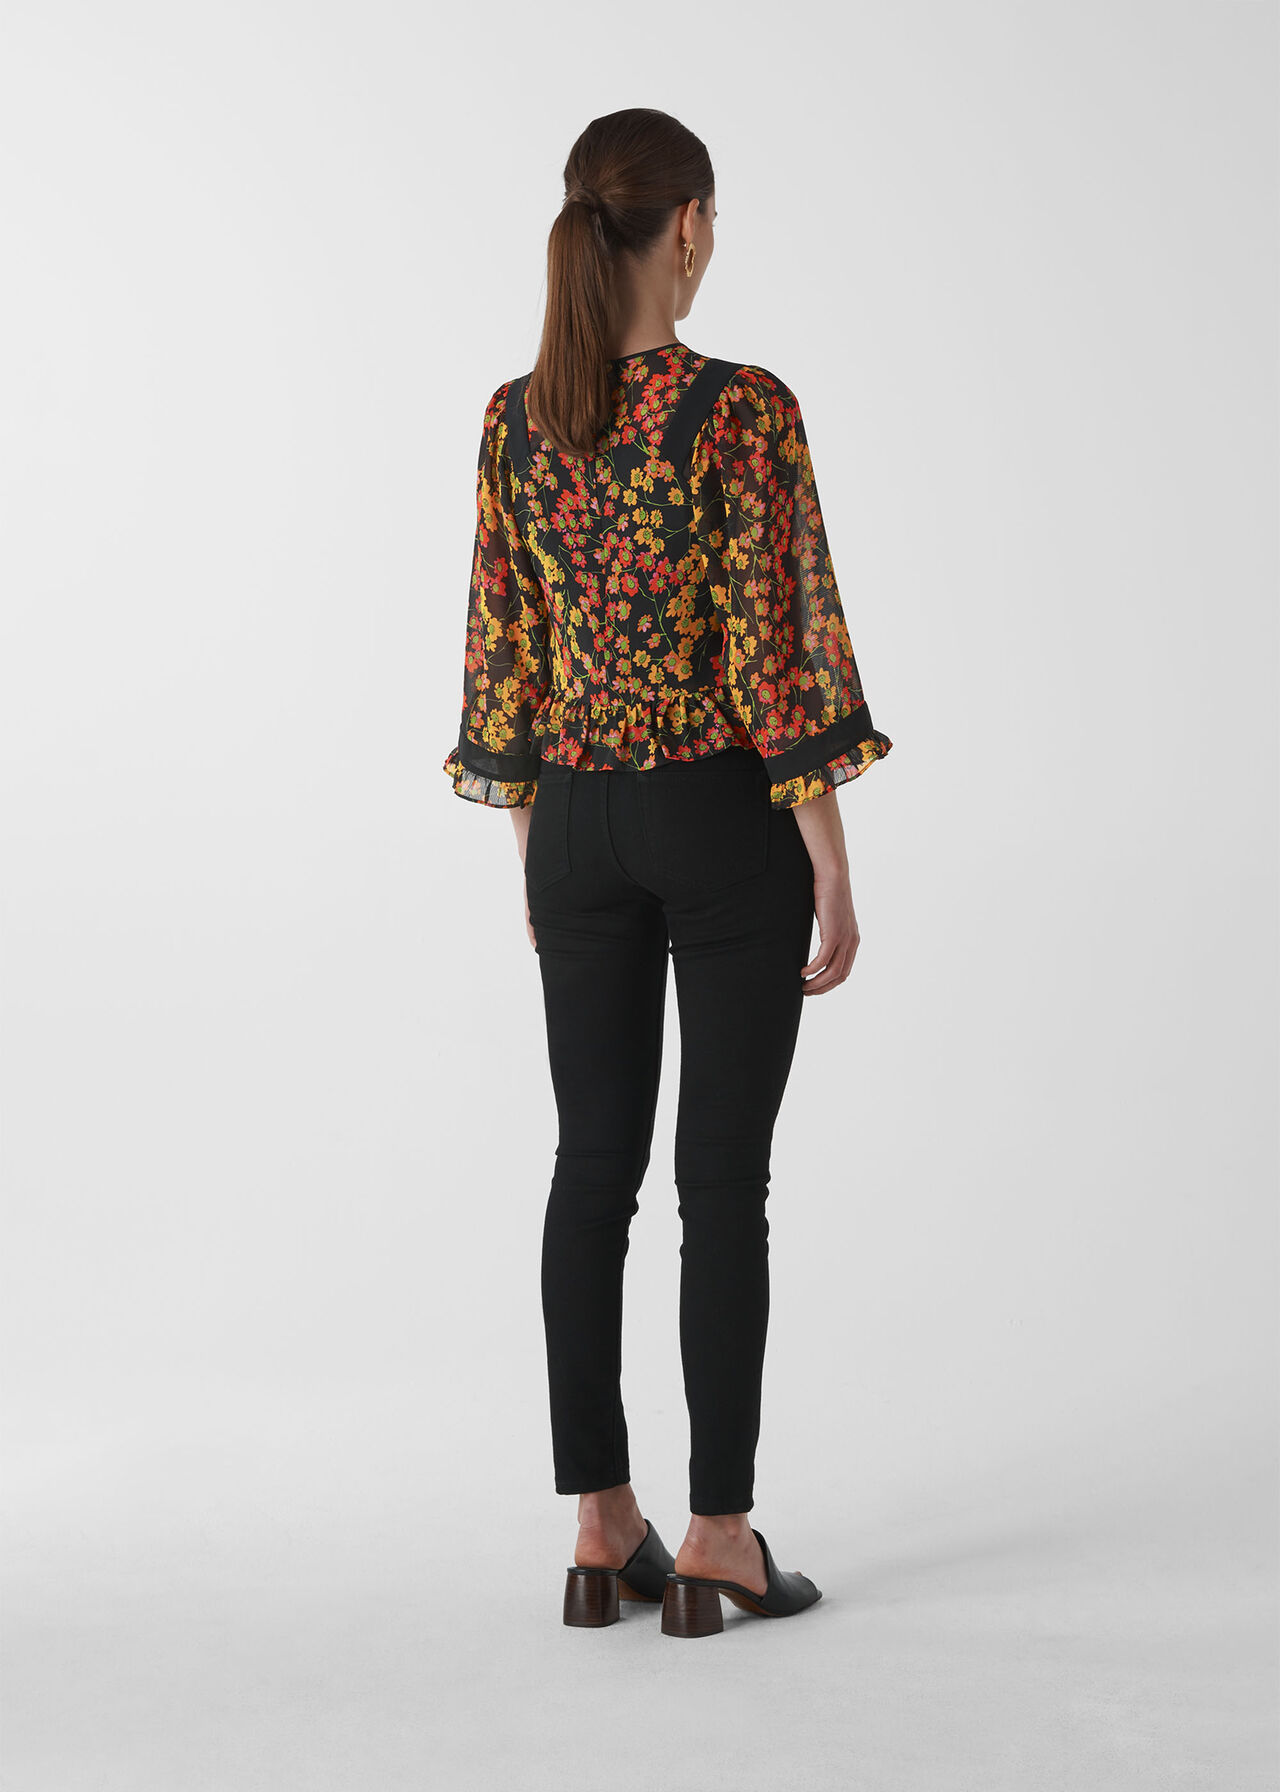 Daisy Print Fluted Top